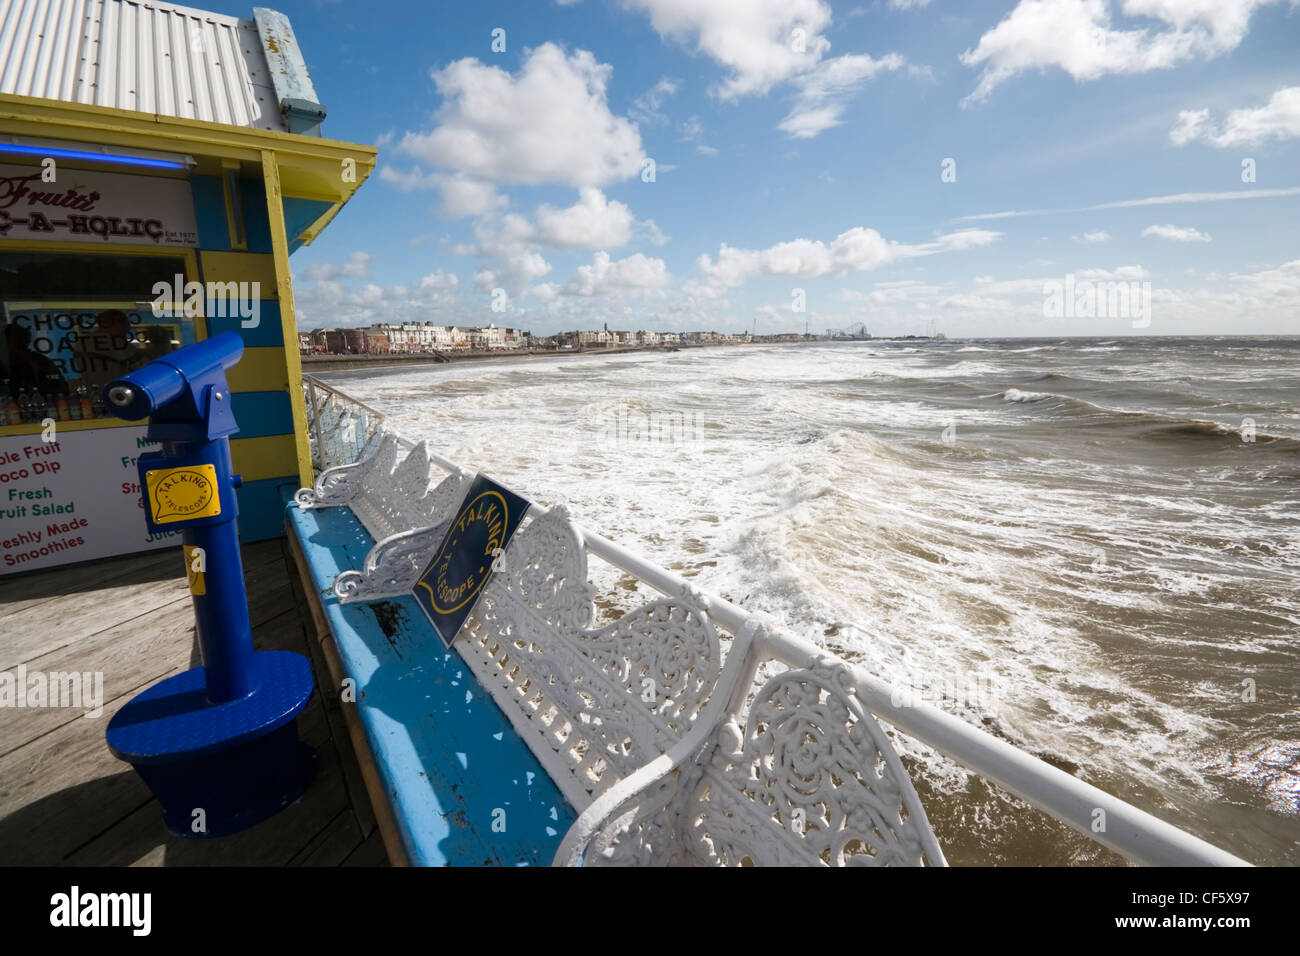 A talking telescope overlooking the seafront at Blackpool. The town is believed to get its name from a drainage channel which ra Stock Photo